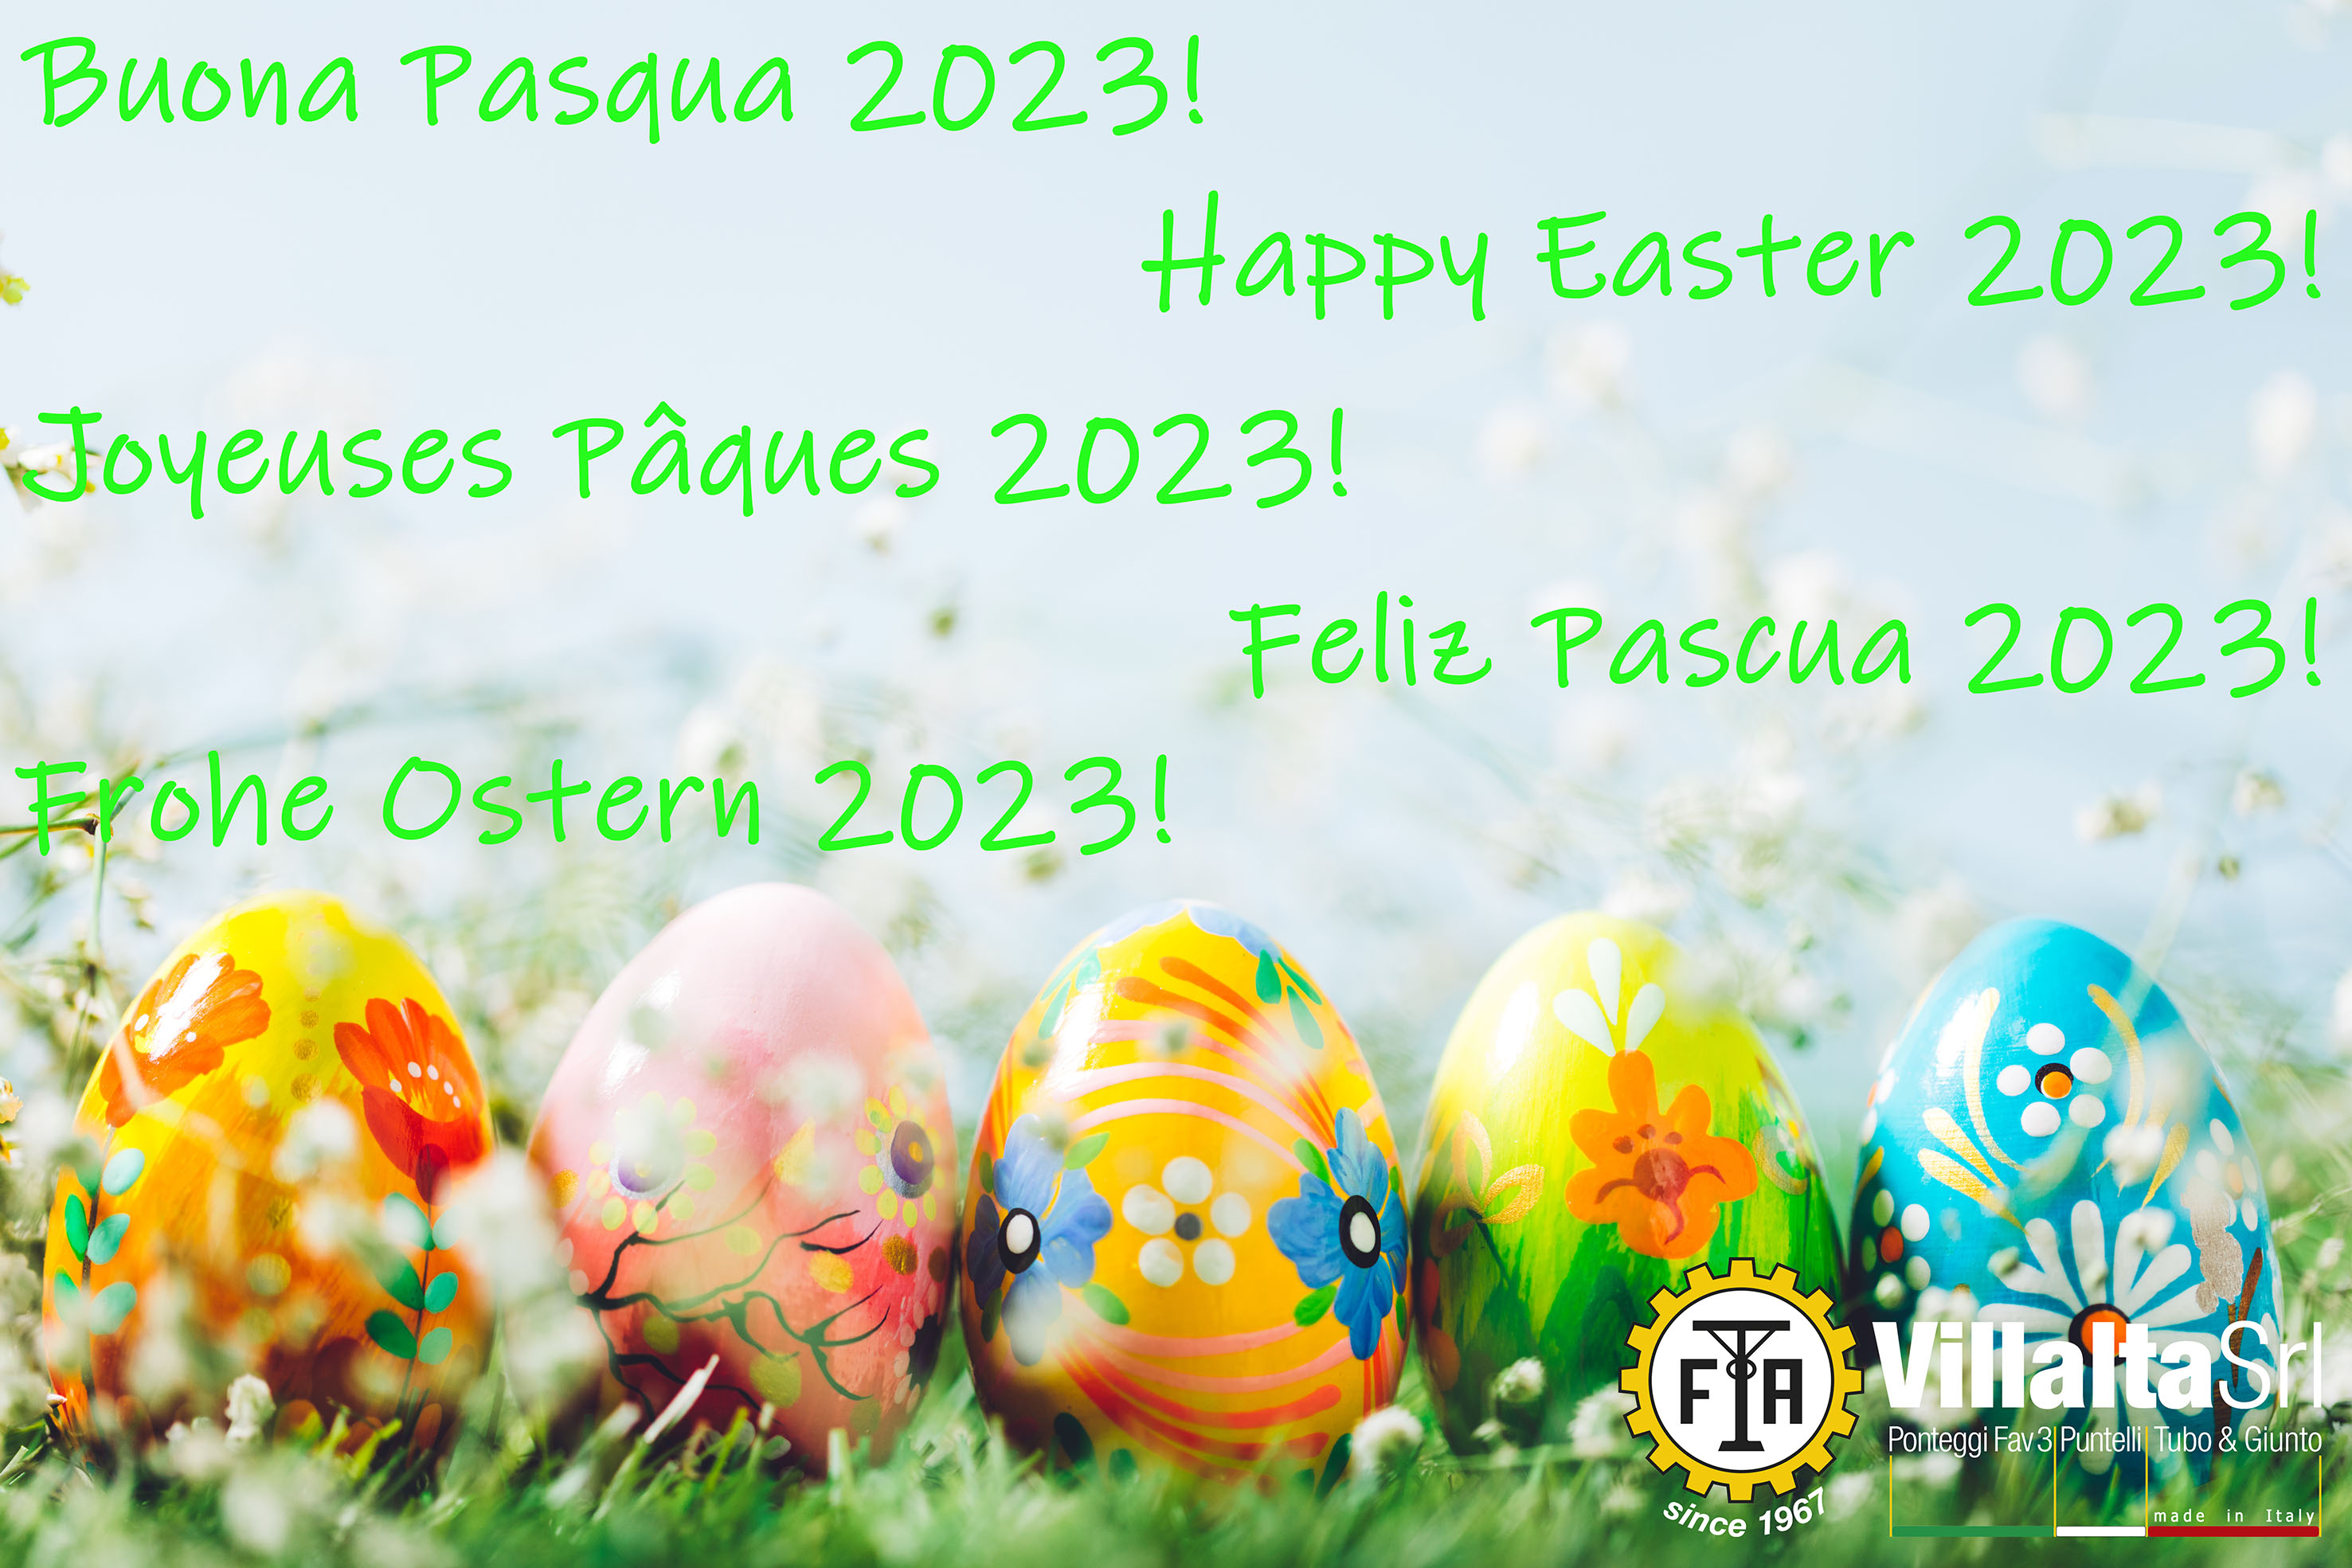 Happy Easter 2023!